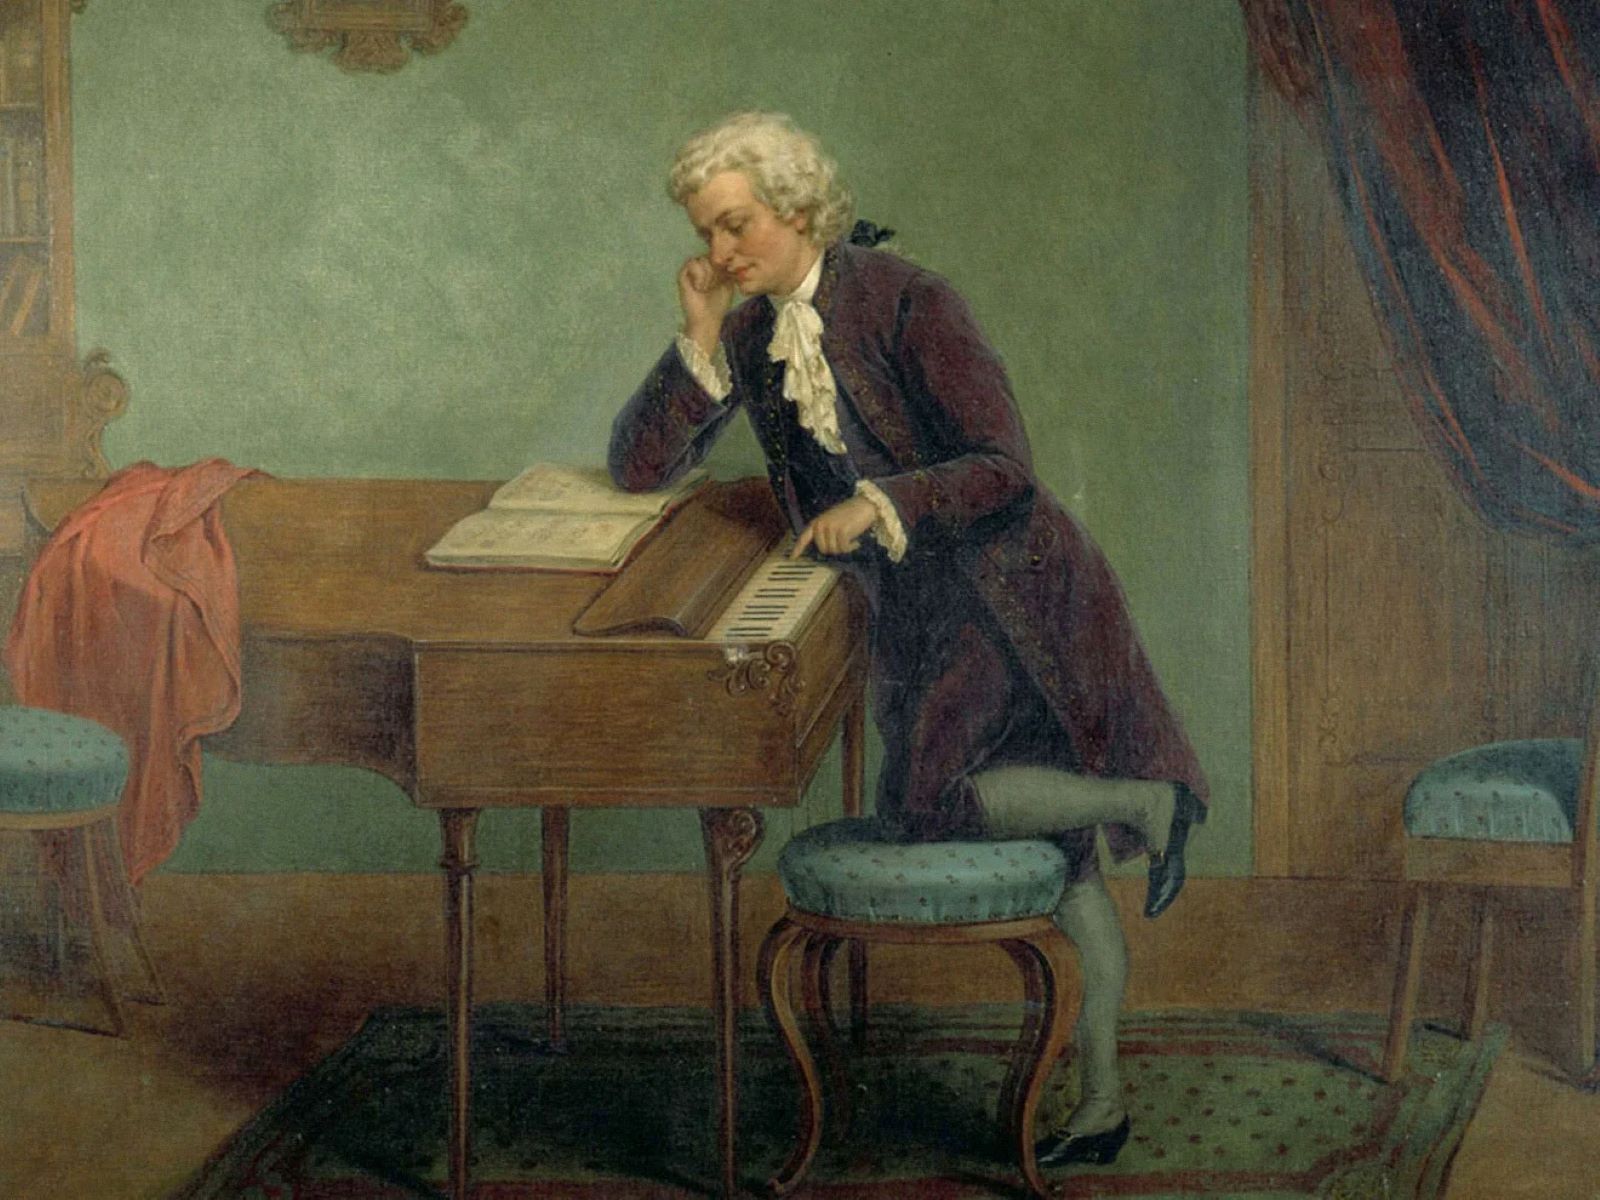 Mozart's Surprising Musical Talents Revealed!